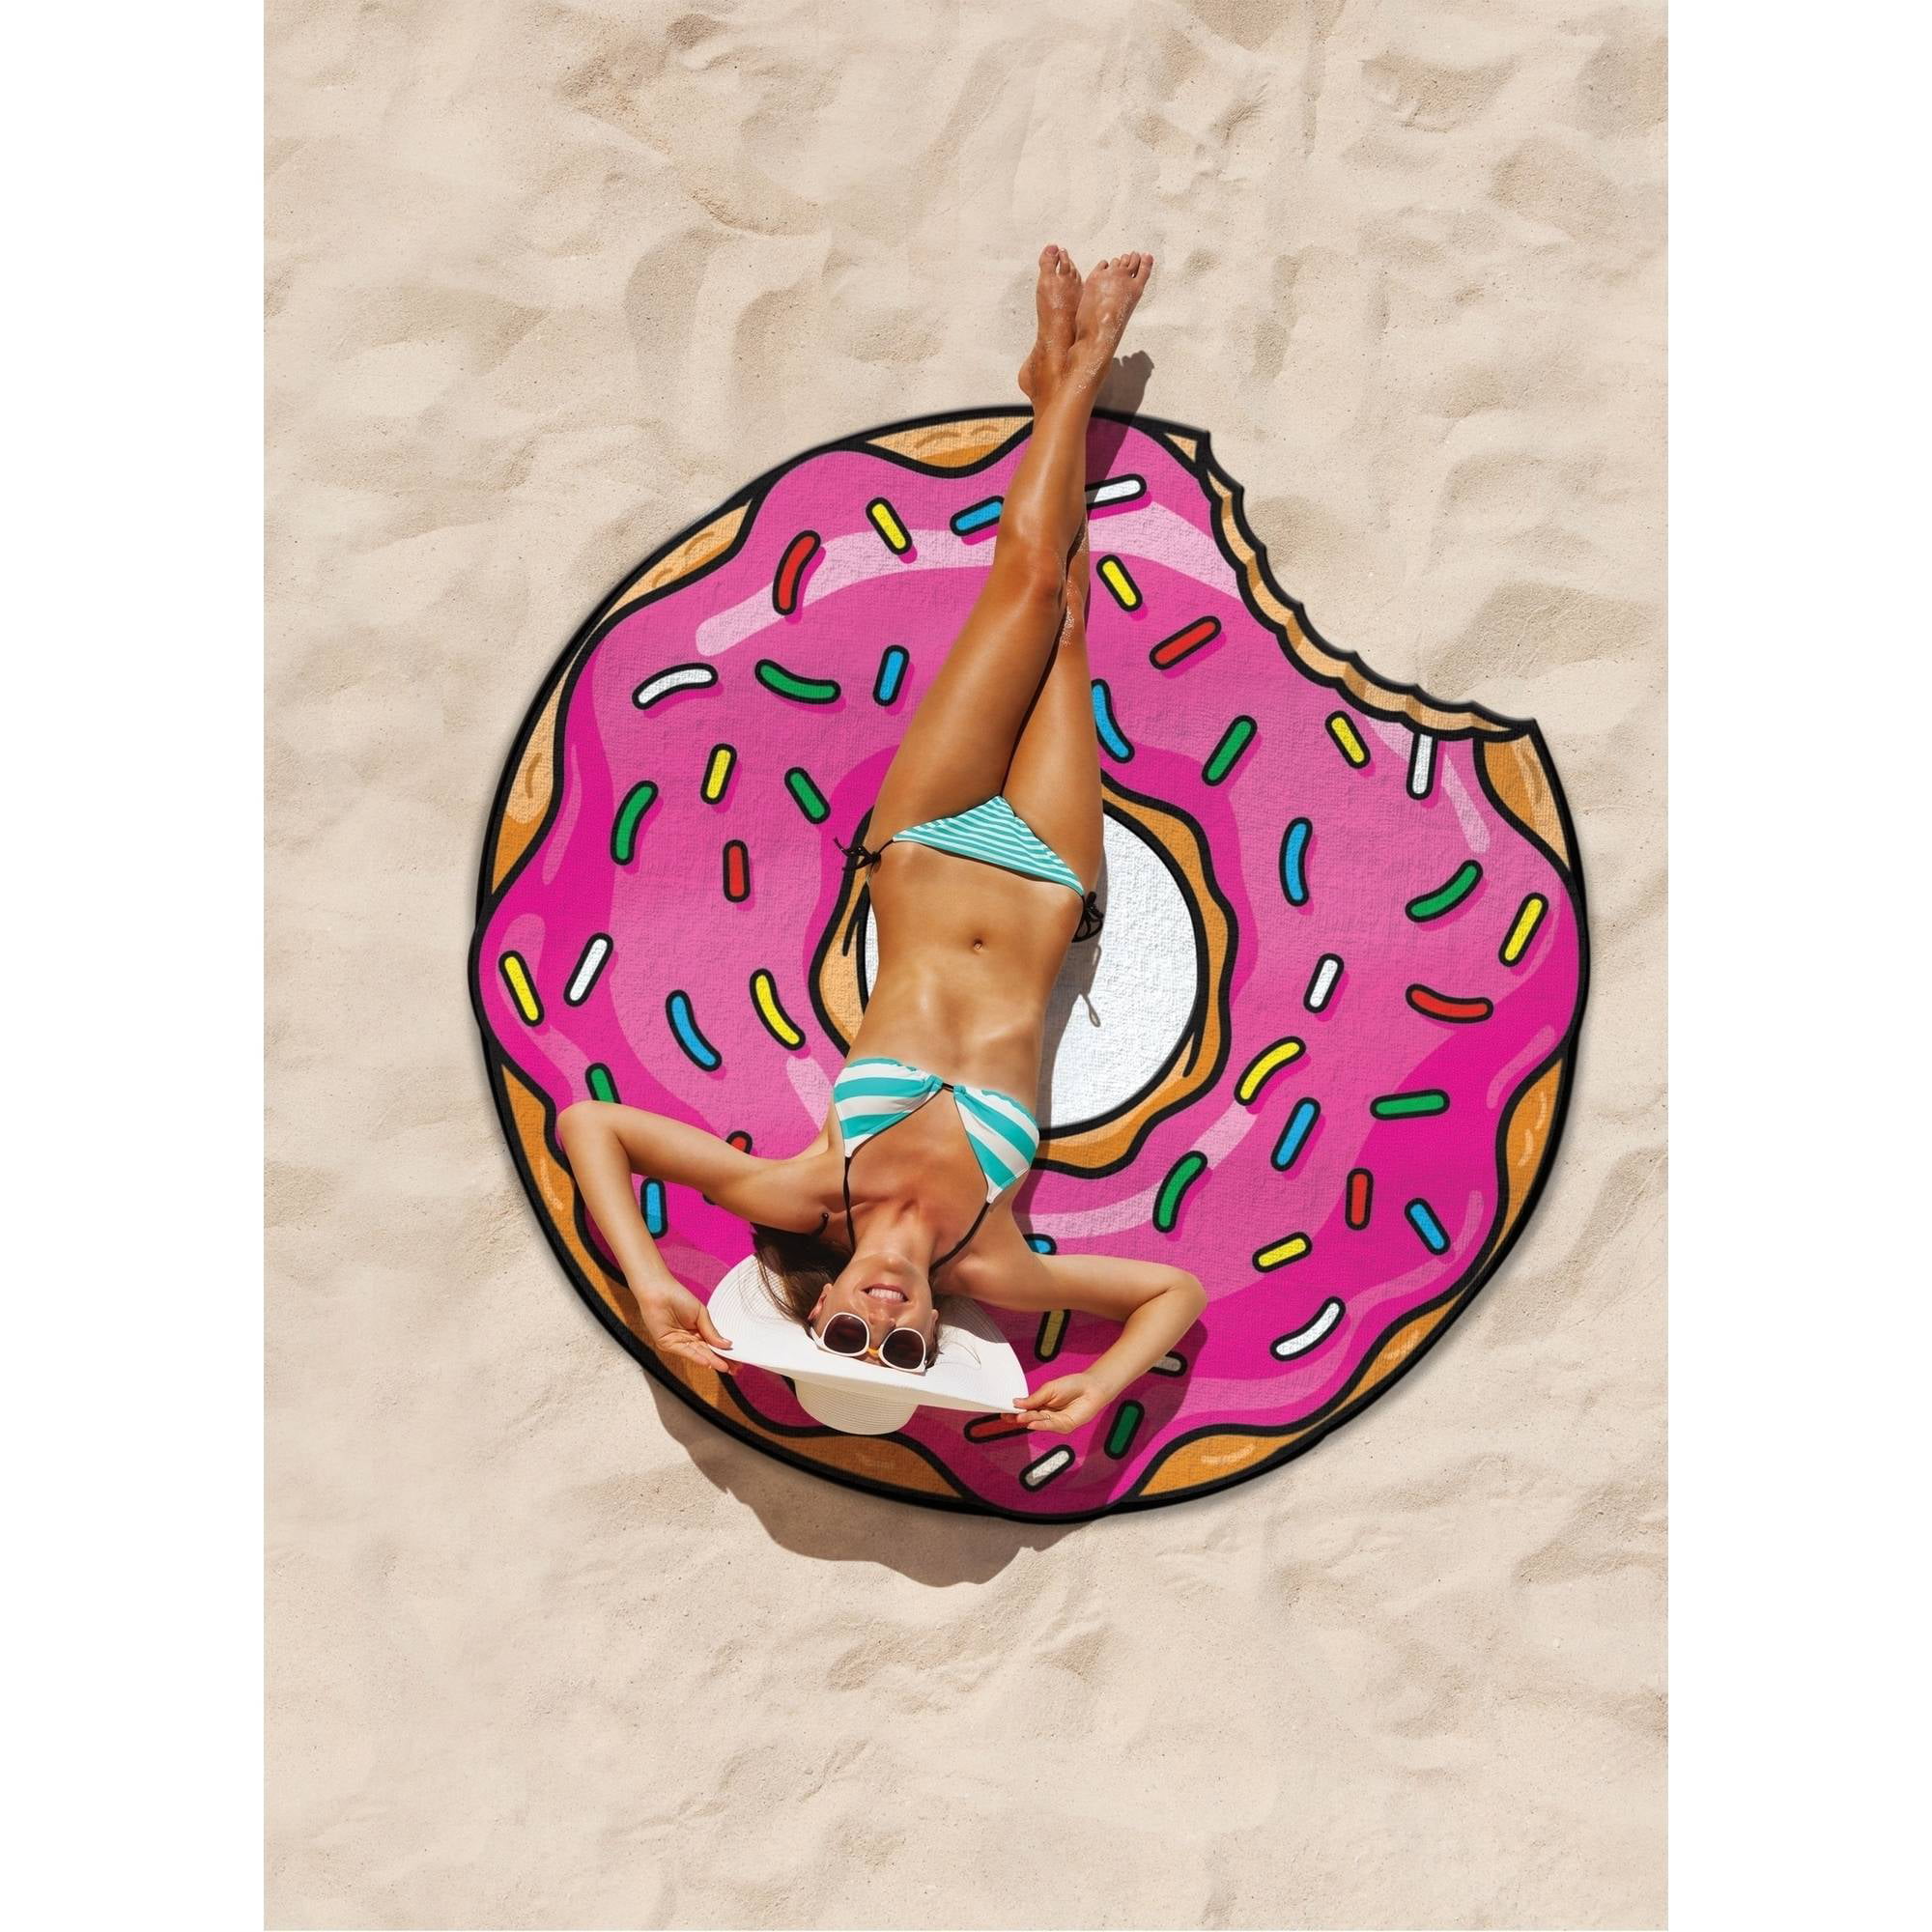 Big Mouth Inc Giant Sized Pink Donut BEACH BLANKET 60” x 60” NEW 